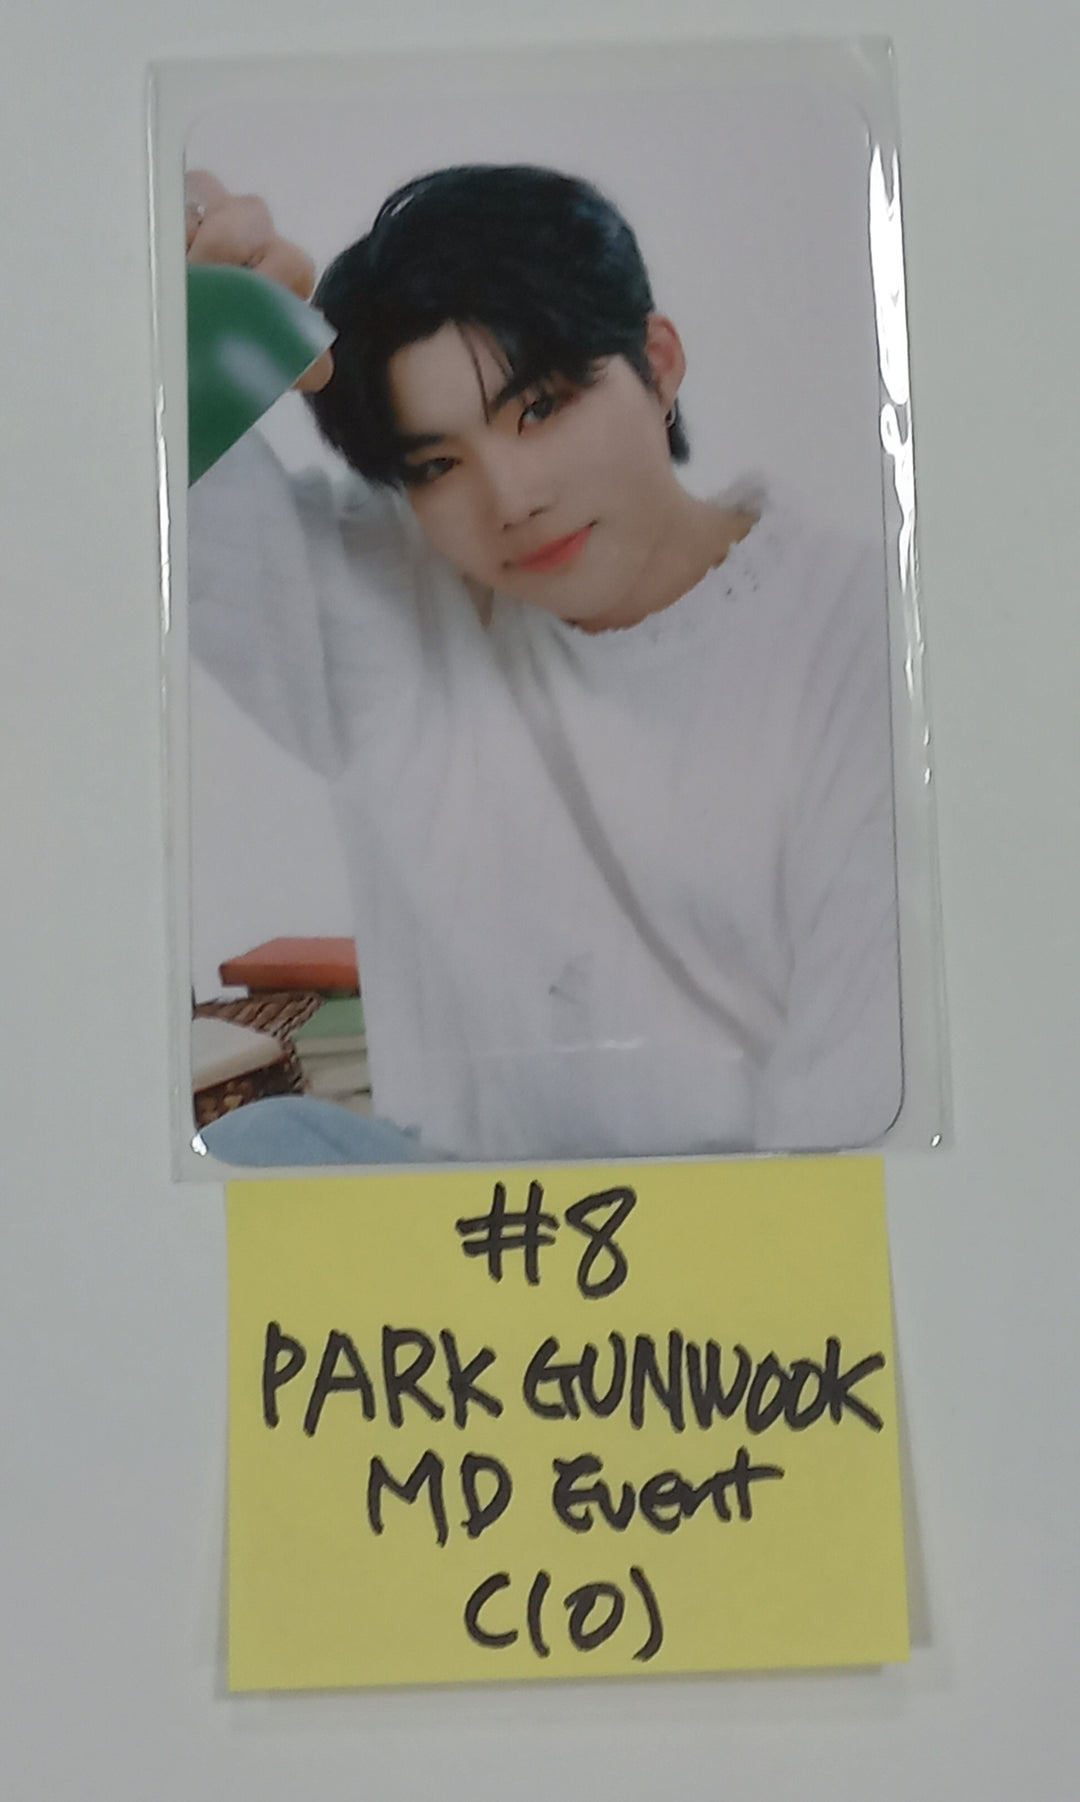 ZEROBASEONE (ZB1) ‘The Moving Seoul Pop-up Store’ - MD Event Photocard